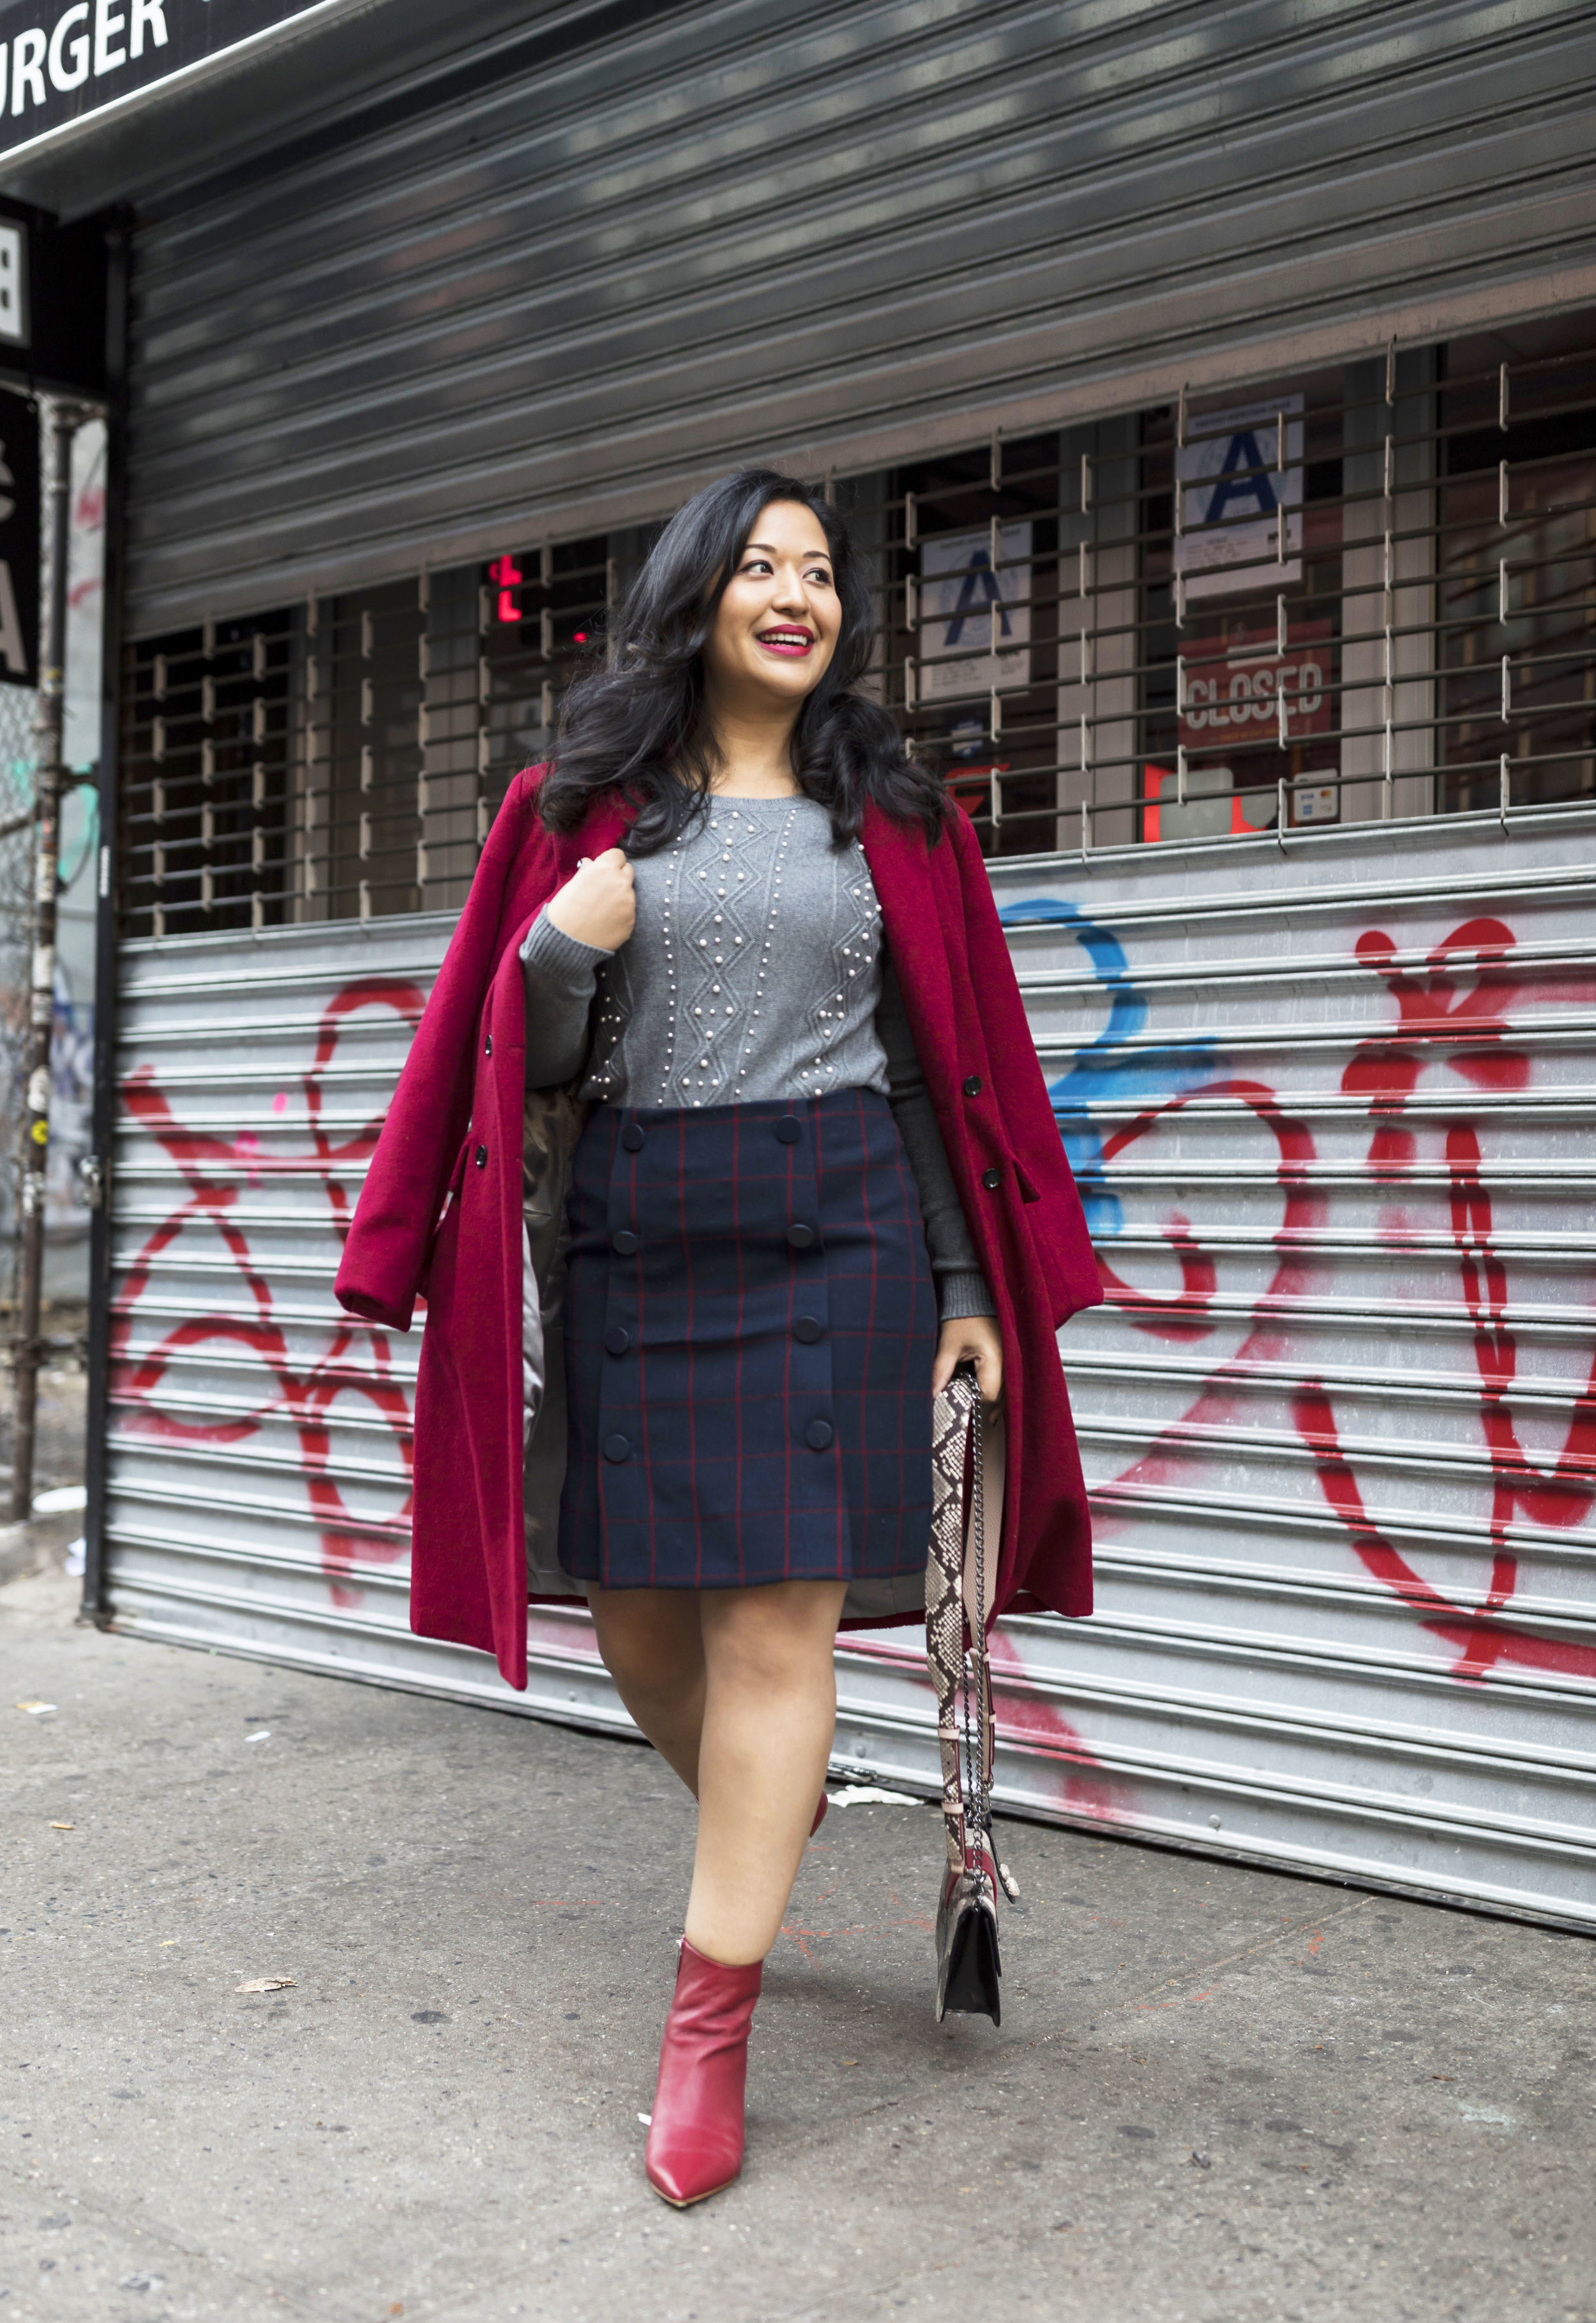 Krity S x Preppy Fall Outfit x Red Coat7.jpg